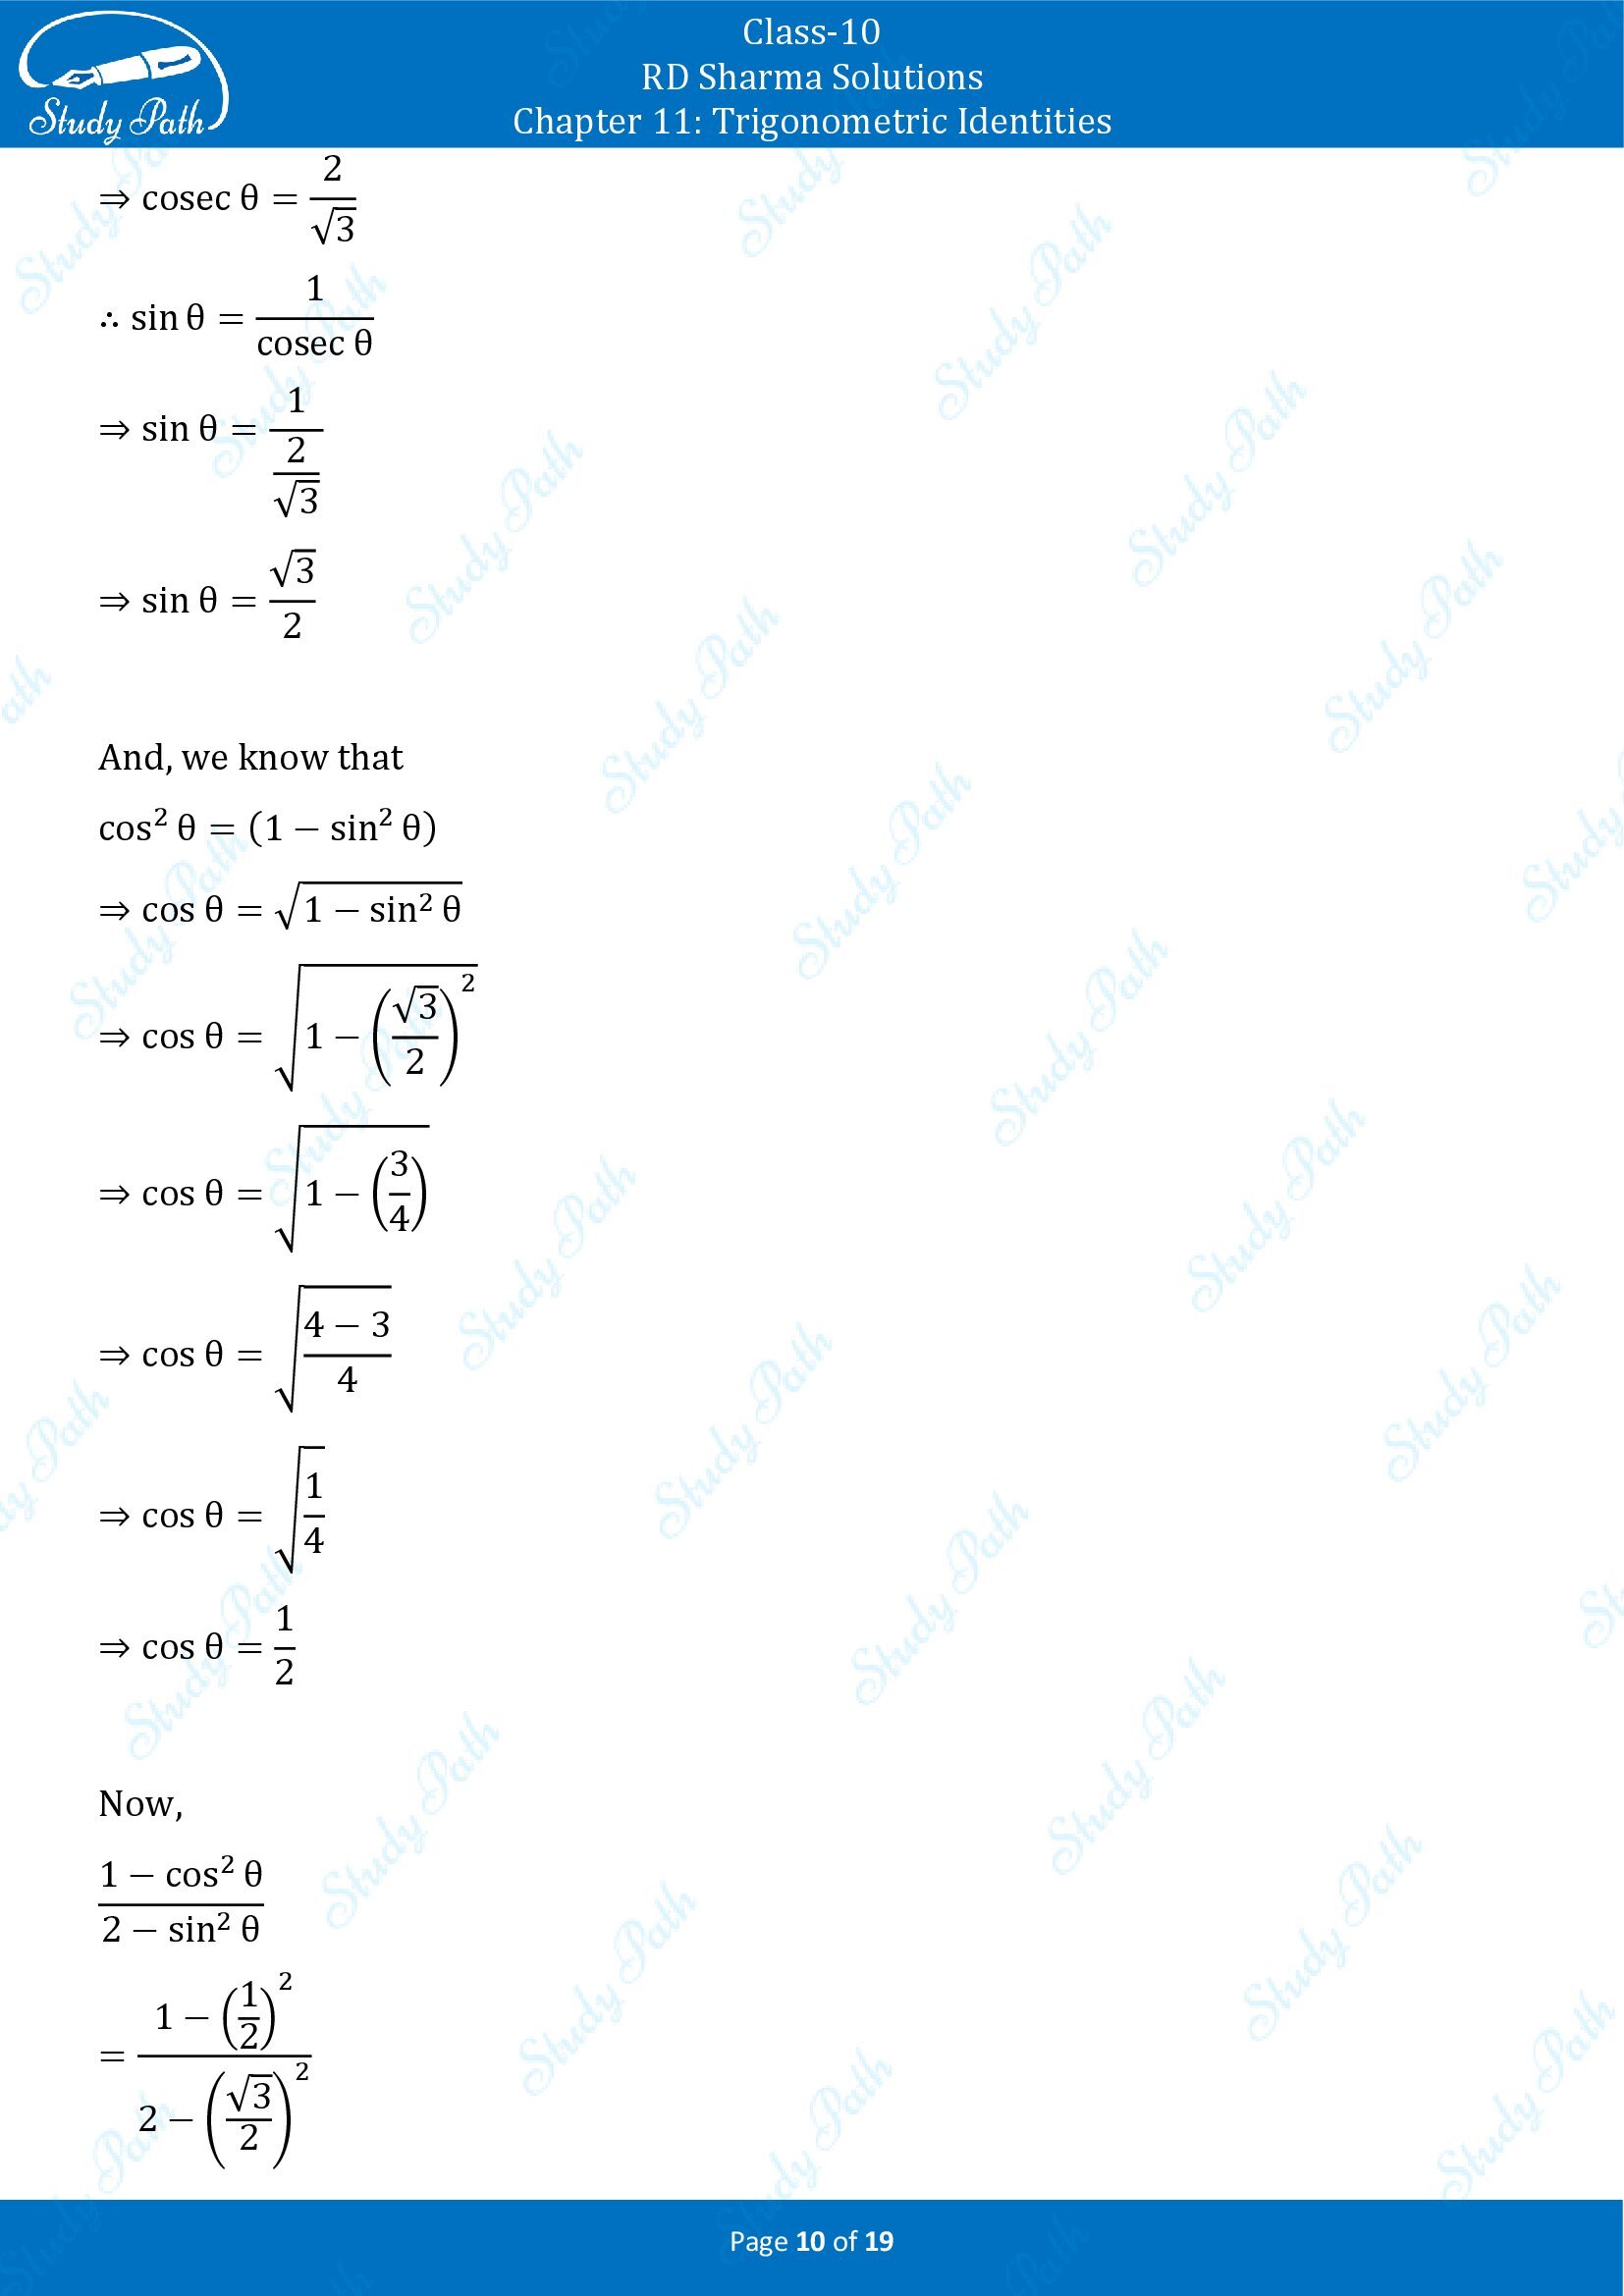 RD Sharma Solutions Class 10 Chapter 11 Trigonometric Identities Exercise 11.2 00010